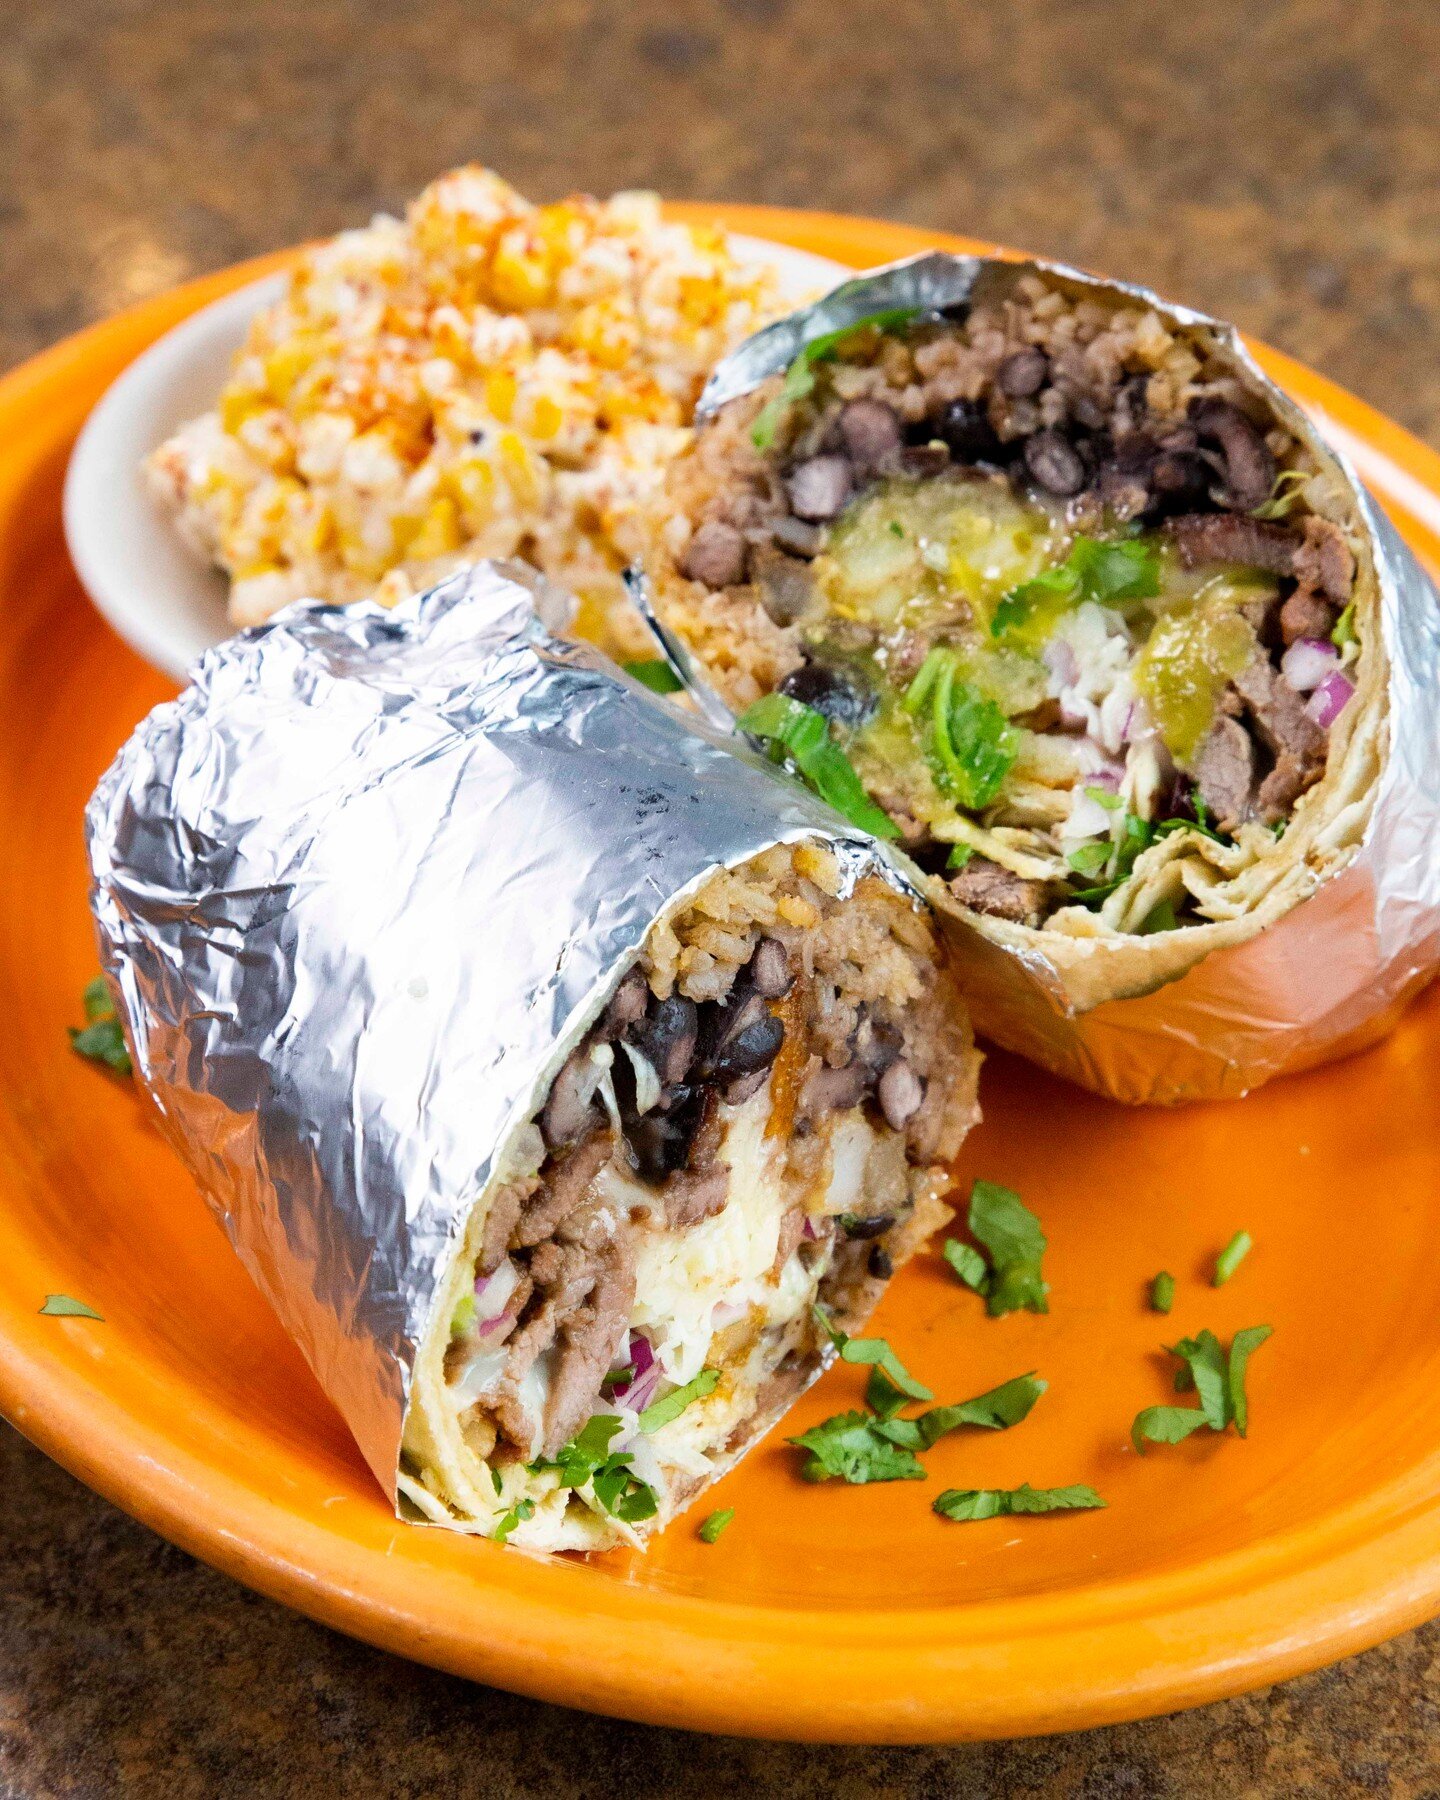 Fan of burritos? 🌯 You have to try our Barbacoa de Res. Stuffed with beef barbacoa, rice, beans, onions, cilantro, salsa verde and roja and cheese, served with &lsquo;esquite&rsquo; street corn on a bowl 🤤

#monterreymexgrill #mexicanfood #comidame